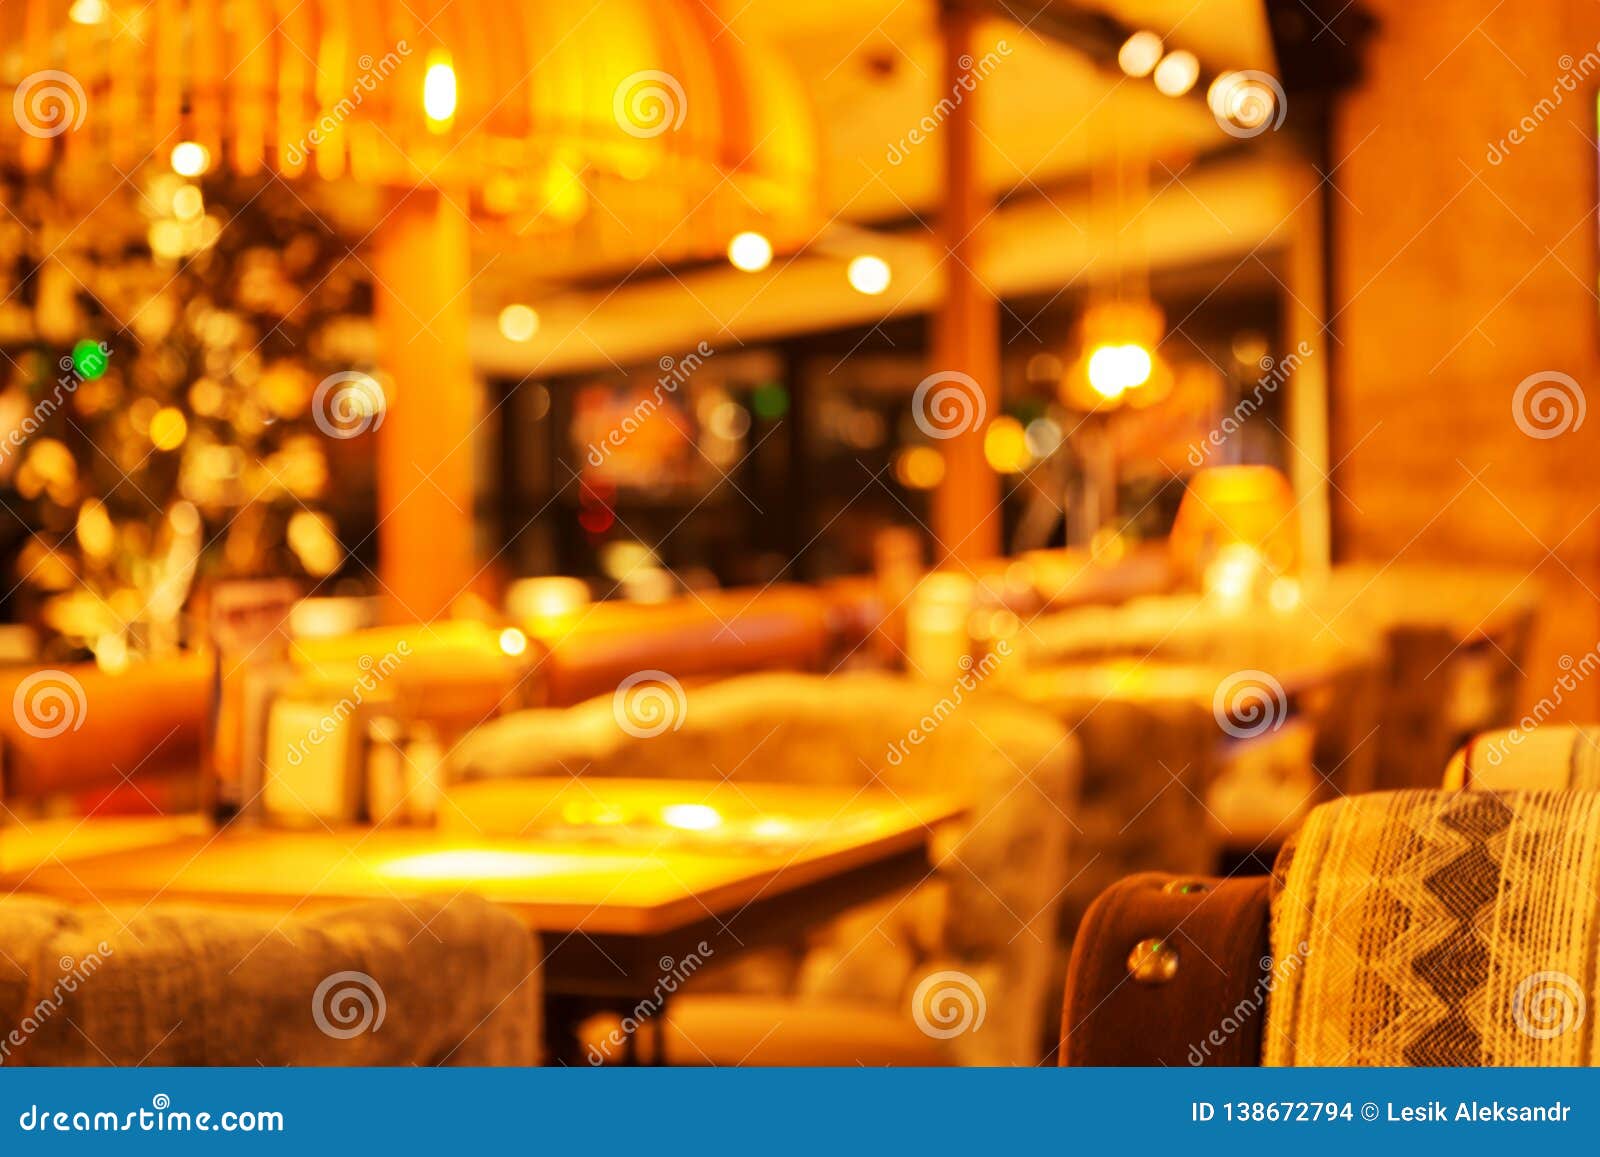 Abstract blurred background of evening cafe, restaurant, pub in warm evening colors. Abstract unsharp background of interior of coffee house, restaurant as blurred background for advertising mounting